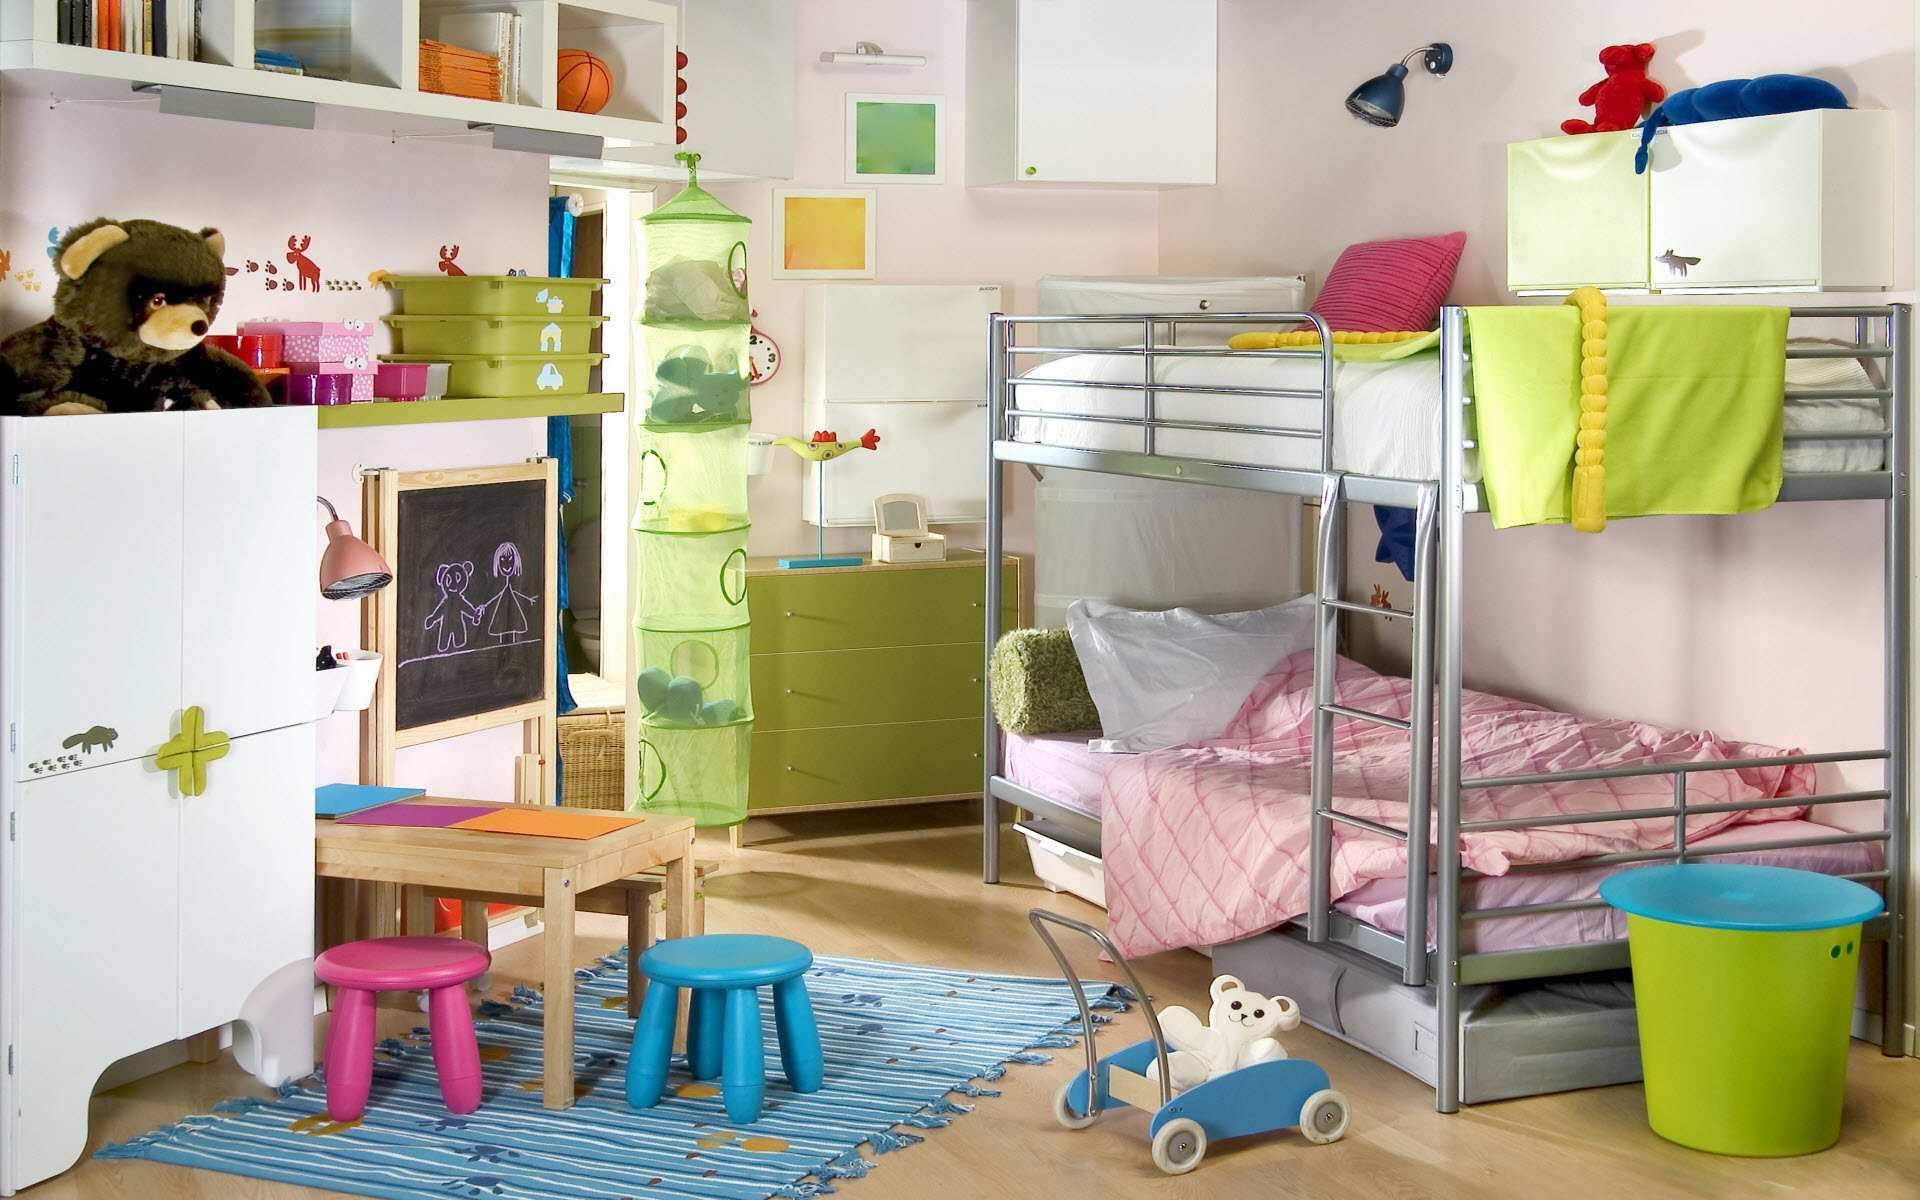 Kid Room Twin Outstanding Kid Room Ideas With Twin Bunk Bed Furnished With Cupboards And Wall Cabinets Plus Completed With Wooden Desk And Tiny Chairs On Blue Rug Kids Room 15 Trendy Kids Room Ideas For The Bold Modern Home